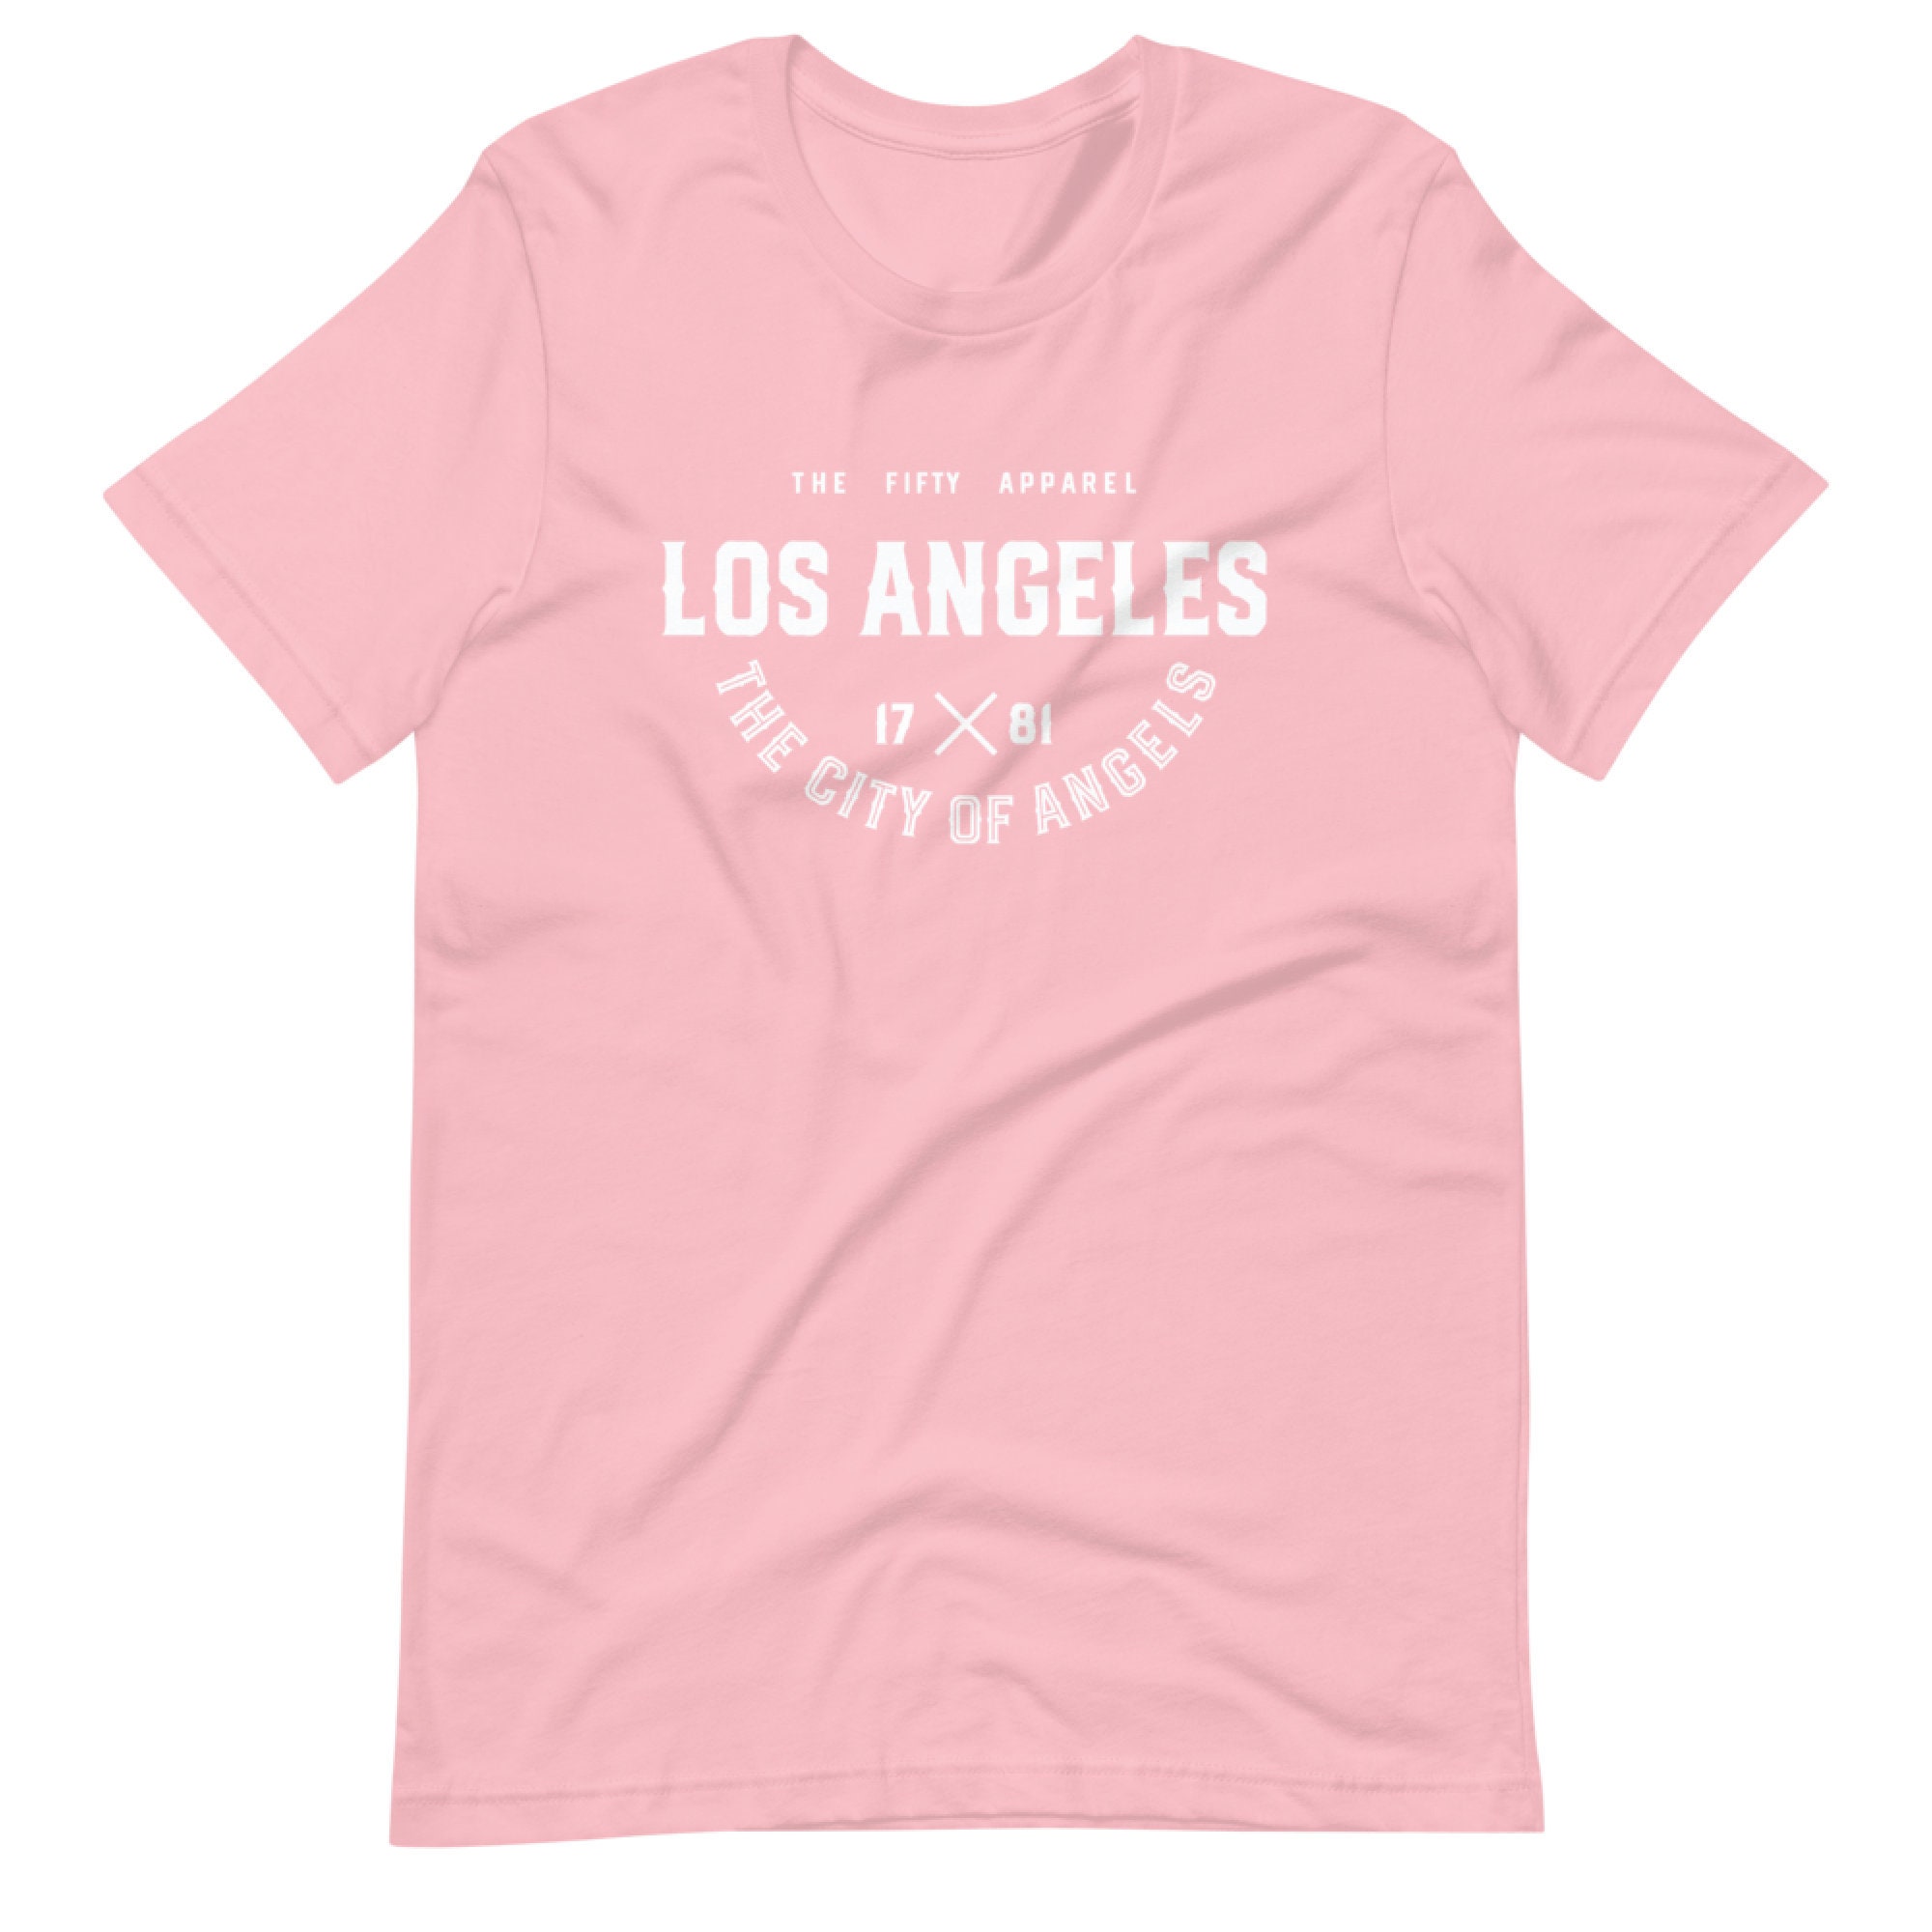 The City of Angels Tees Los Angeles California | Etsy